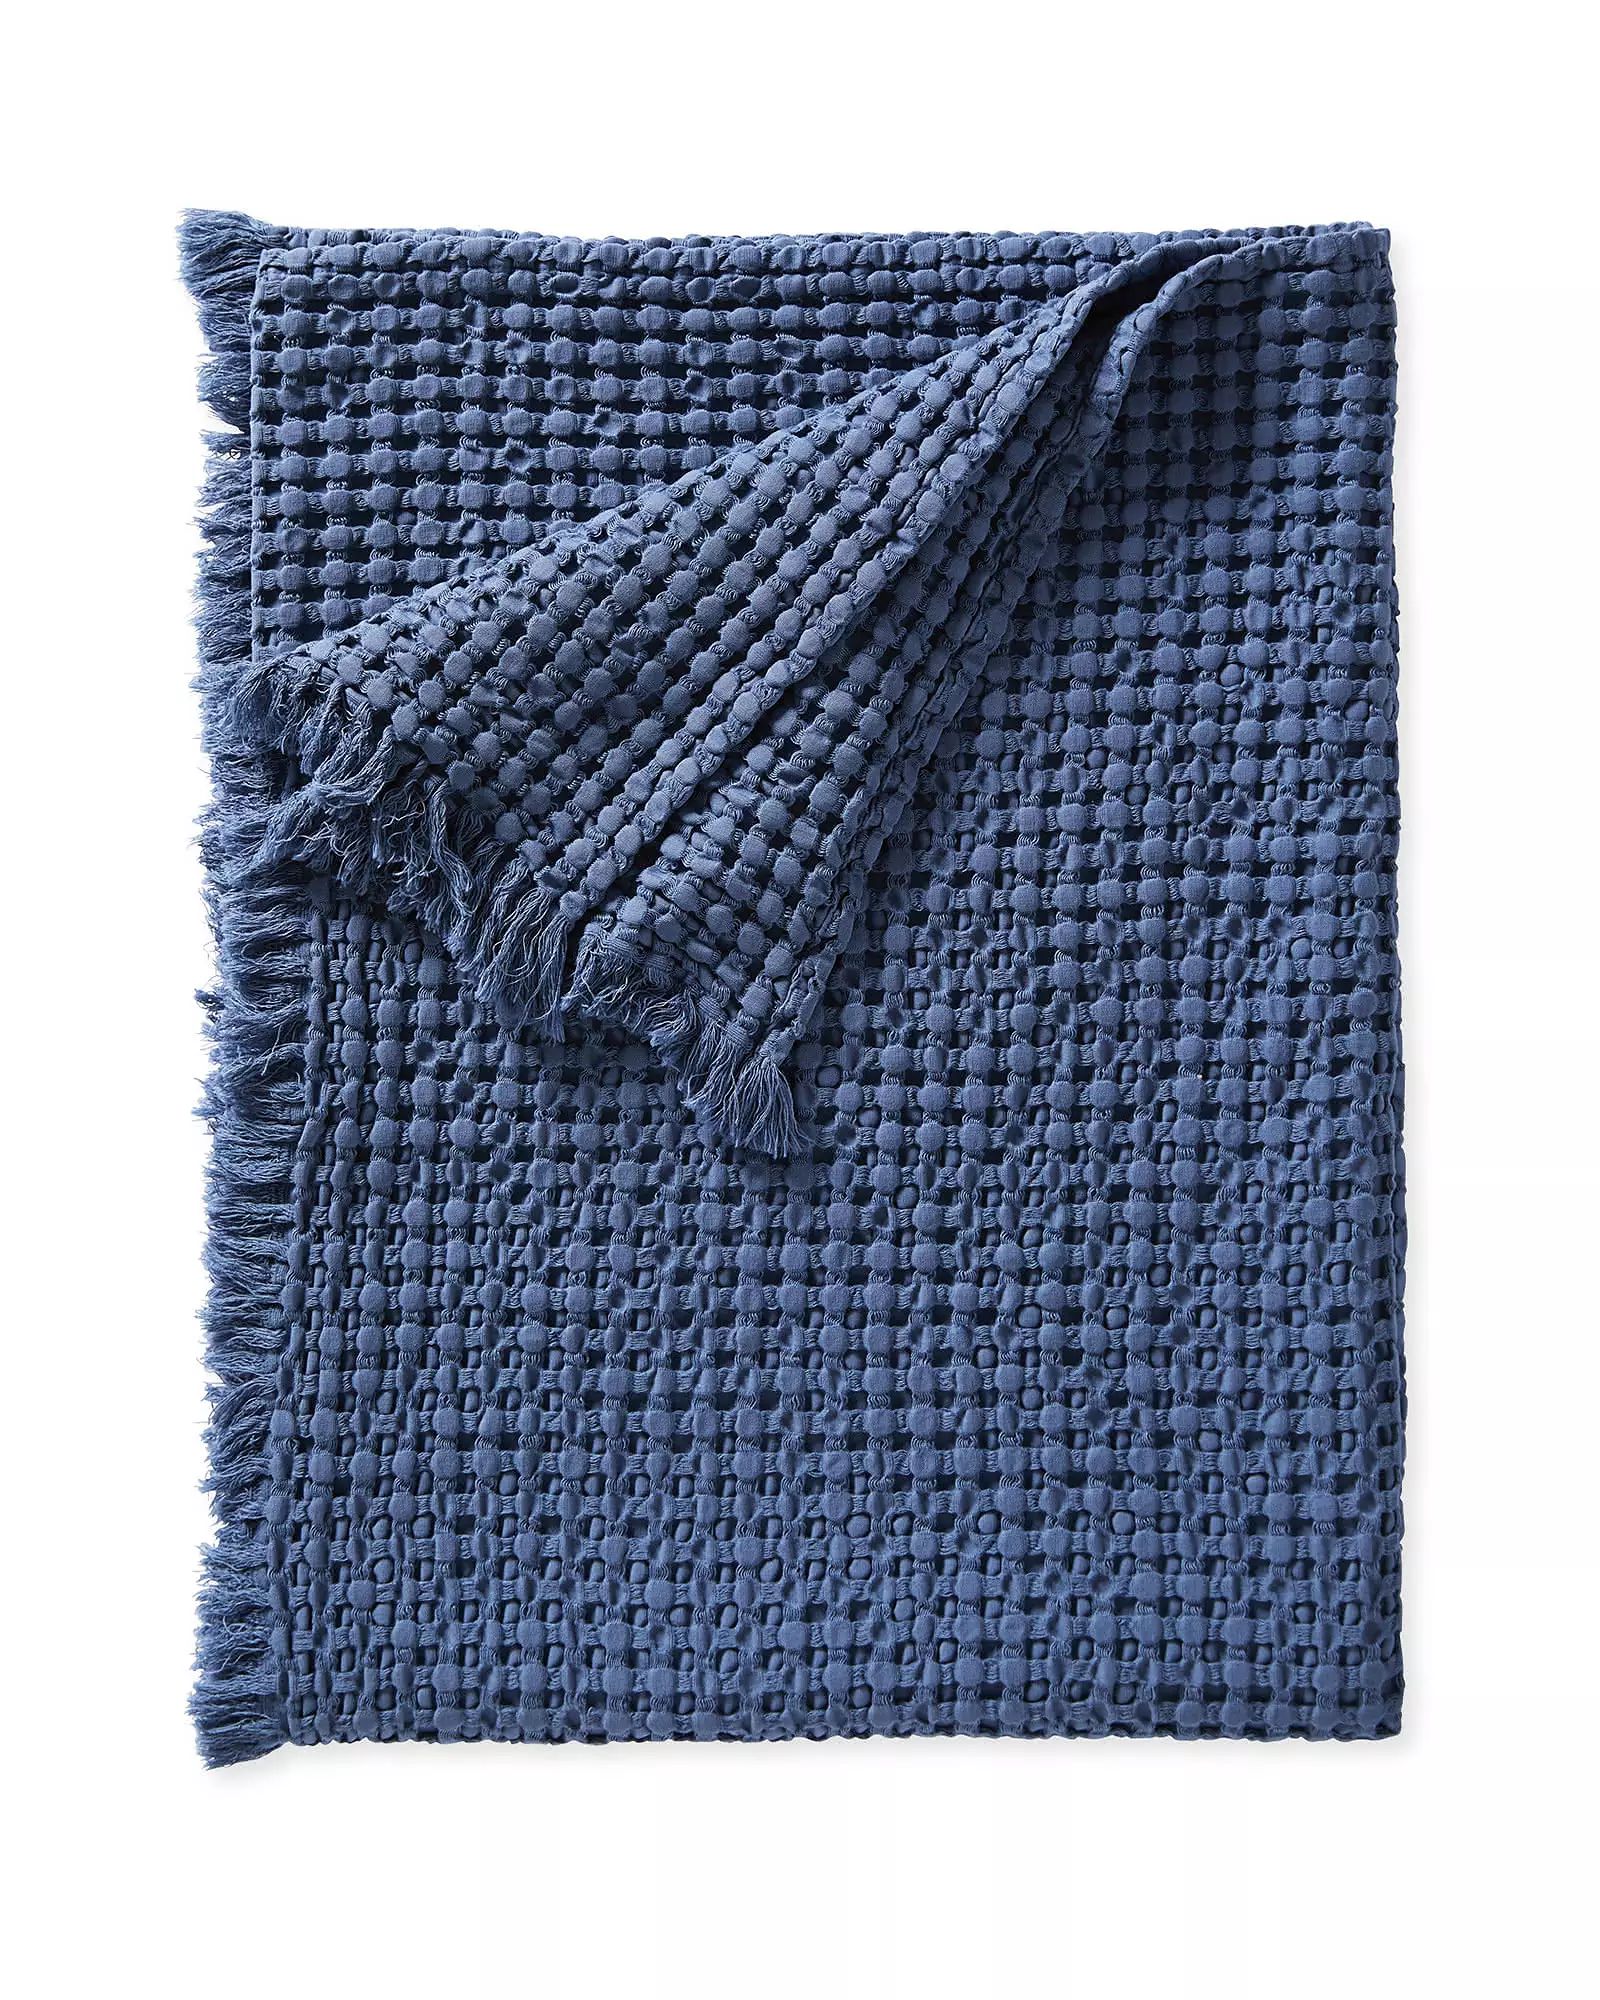 Beachcomber Cotton Throw | Serena and Lily